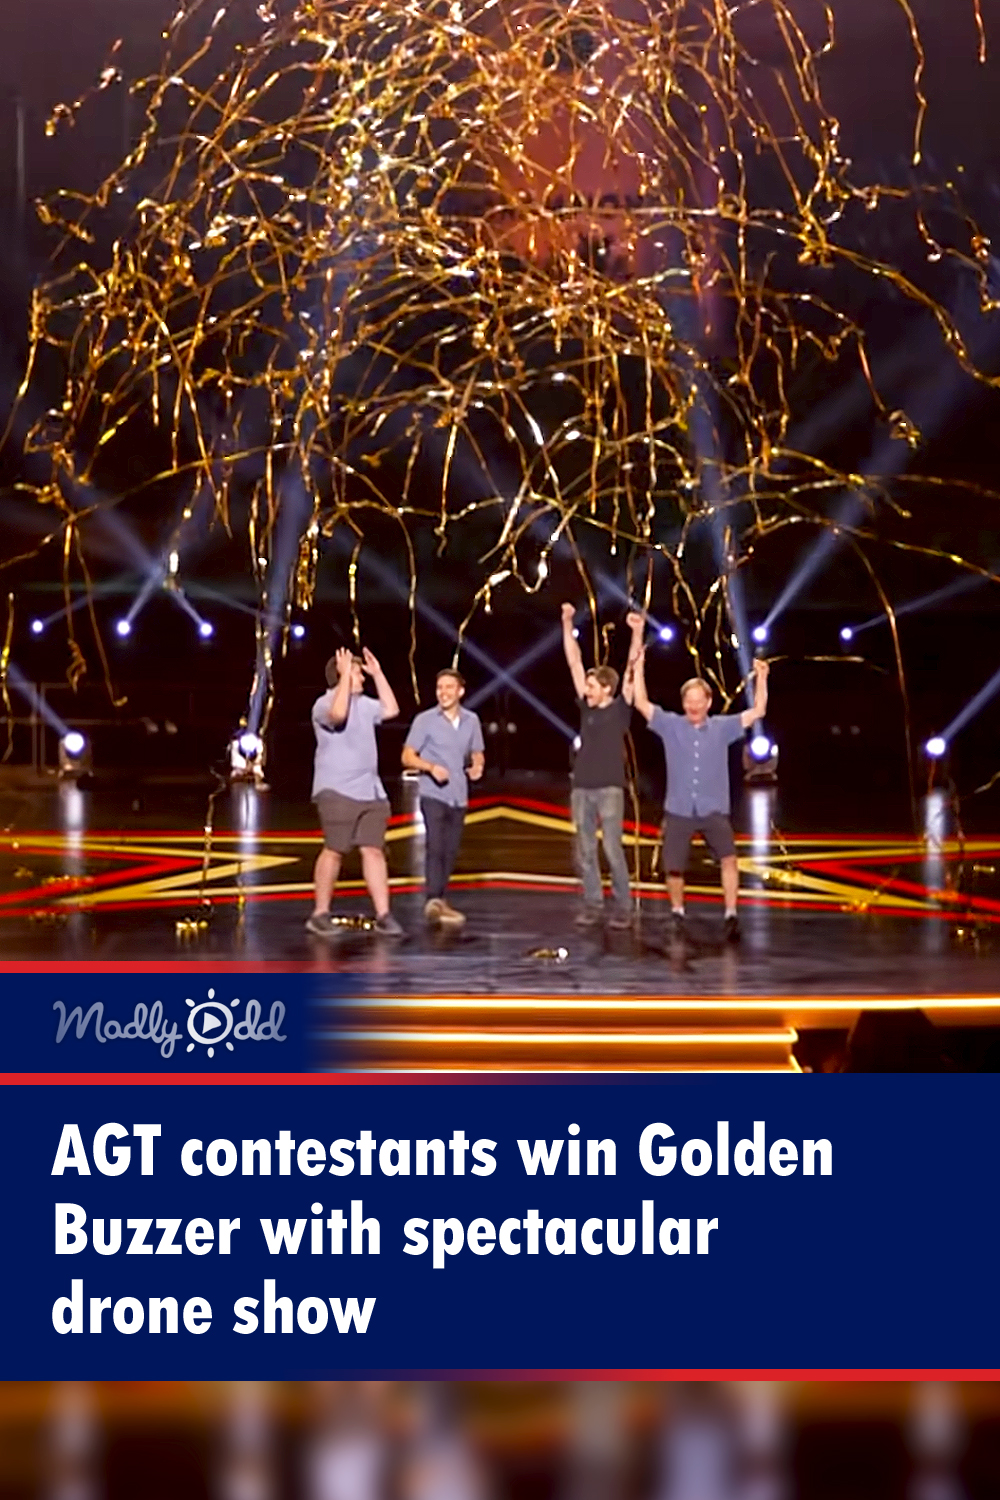 AGT contestants win Golden Buzzer with spectacular drone show Madly Odd!